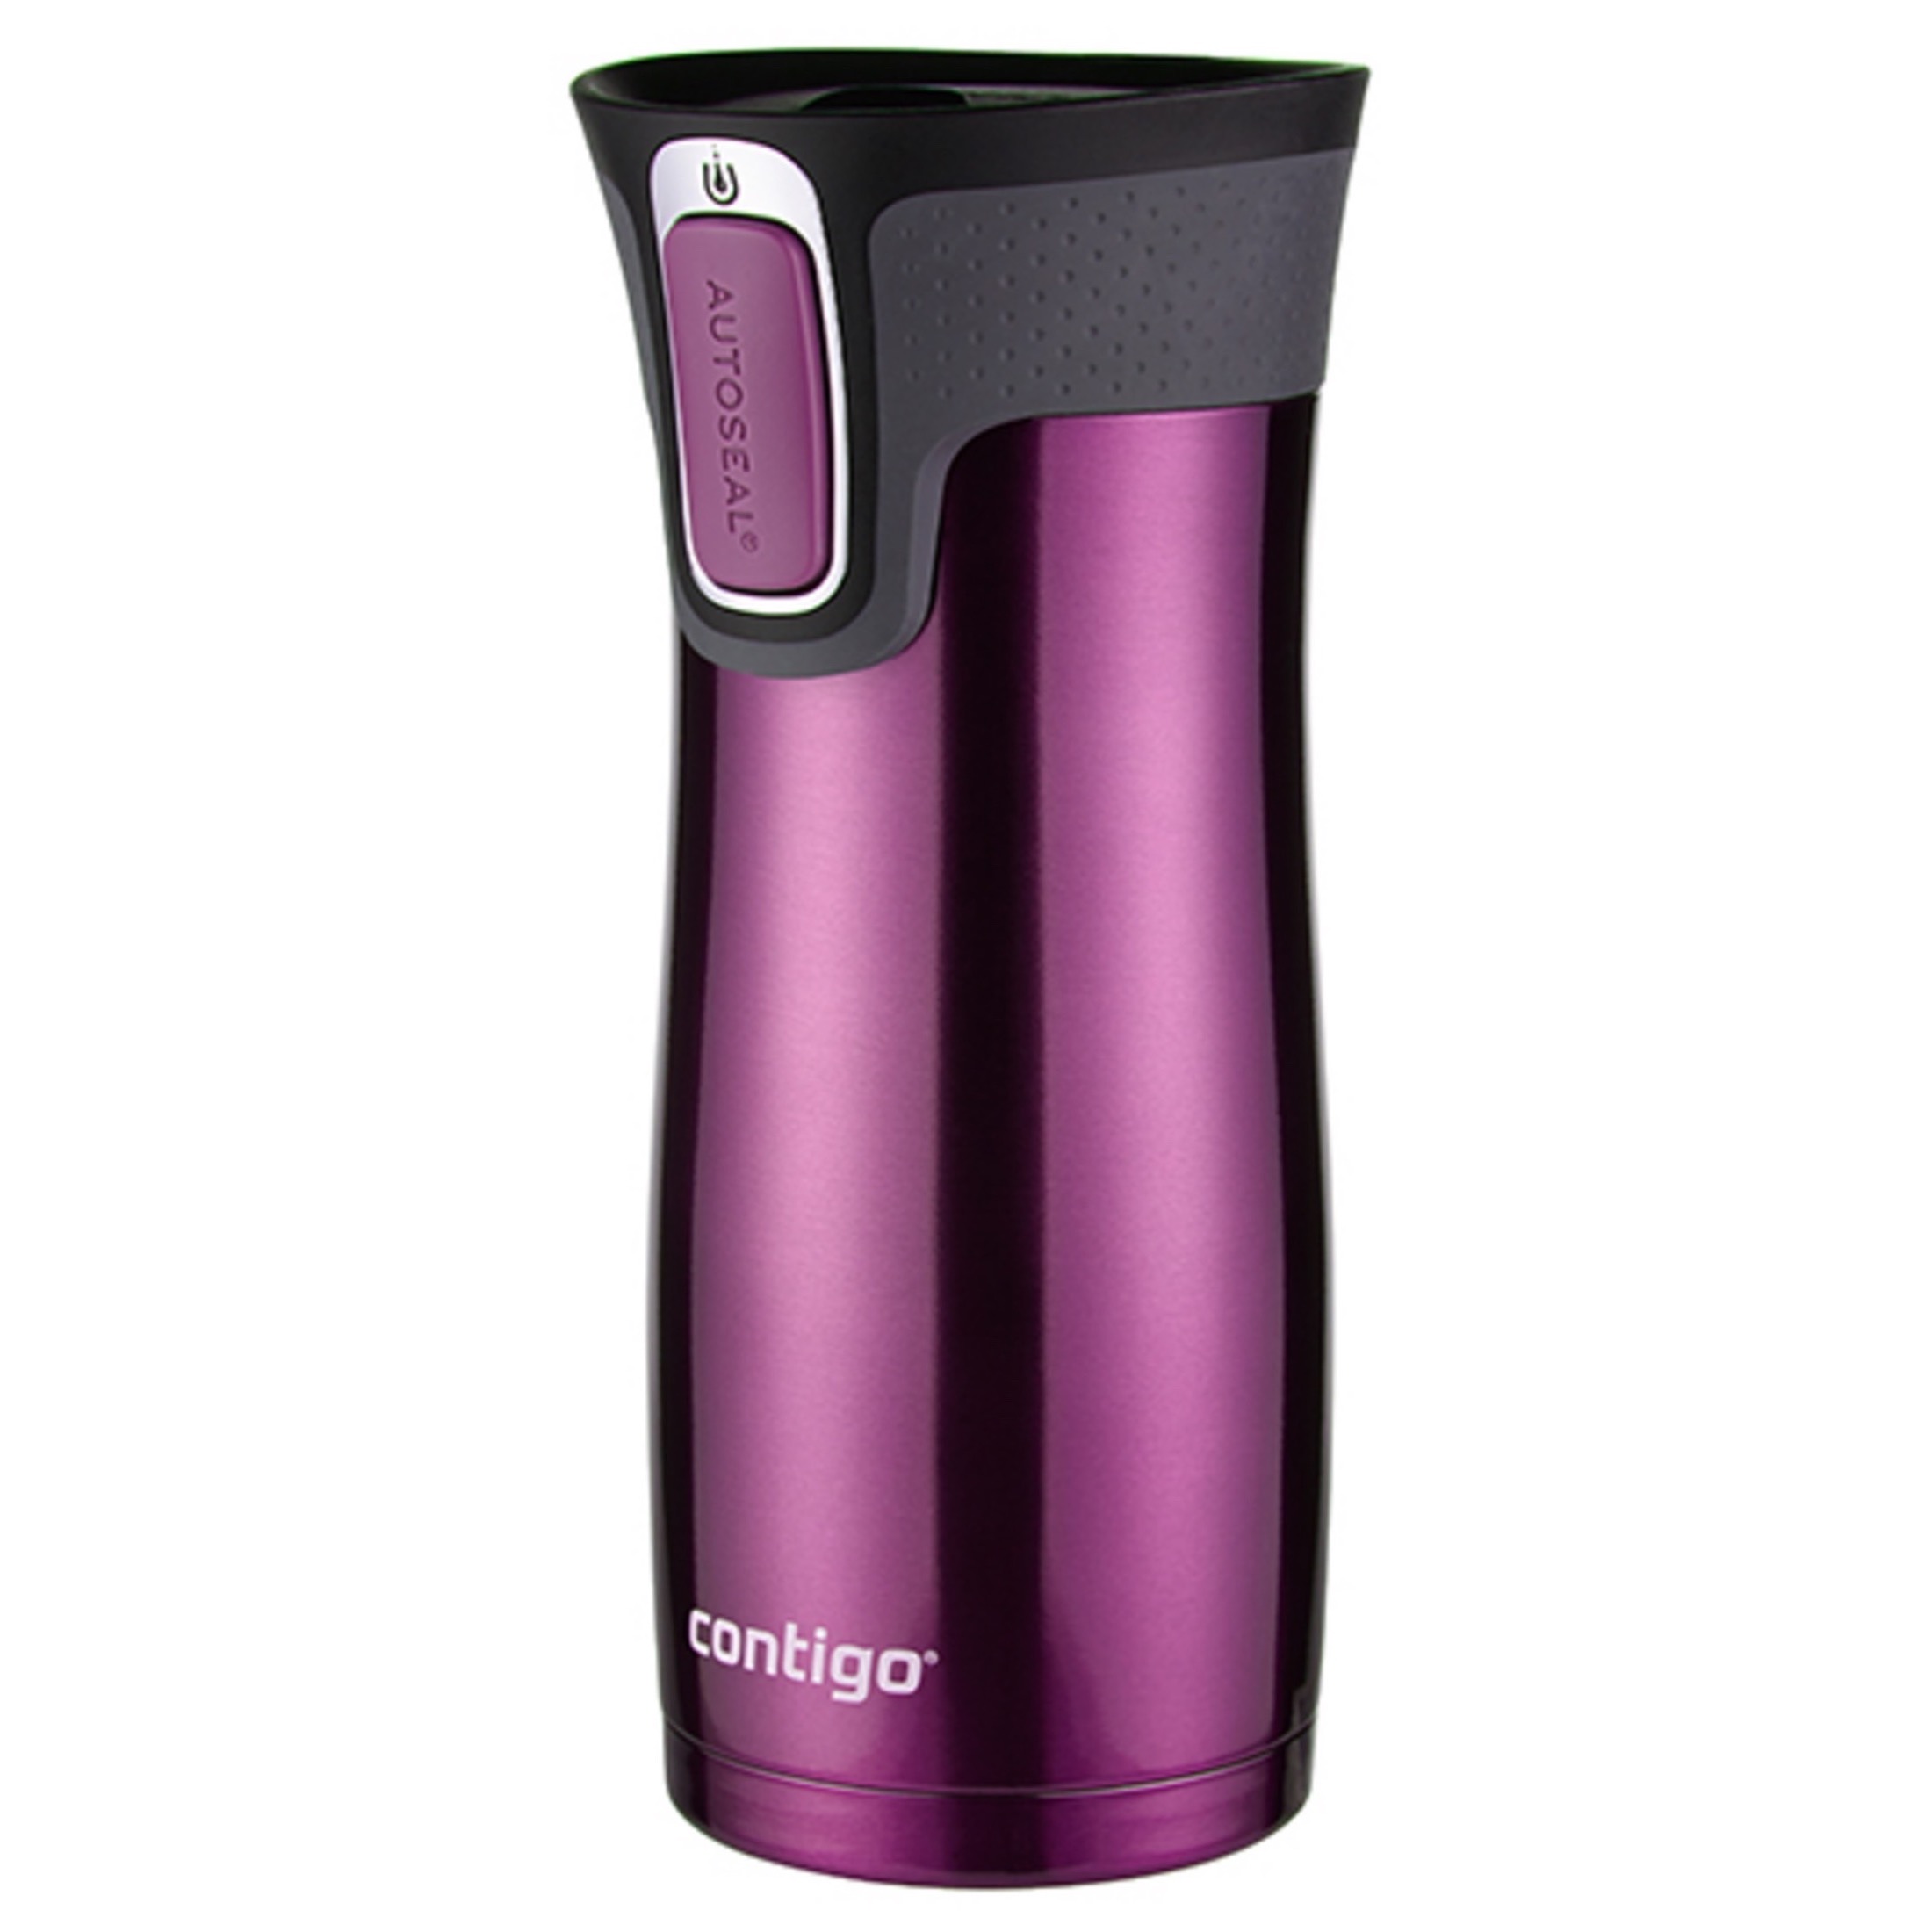 Contigo West Loop Stainless Steel Travel Mug with AUTOSEAL Lid Radiant Orchid, 16 fl oz. - image 2 of 4